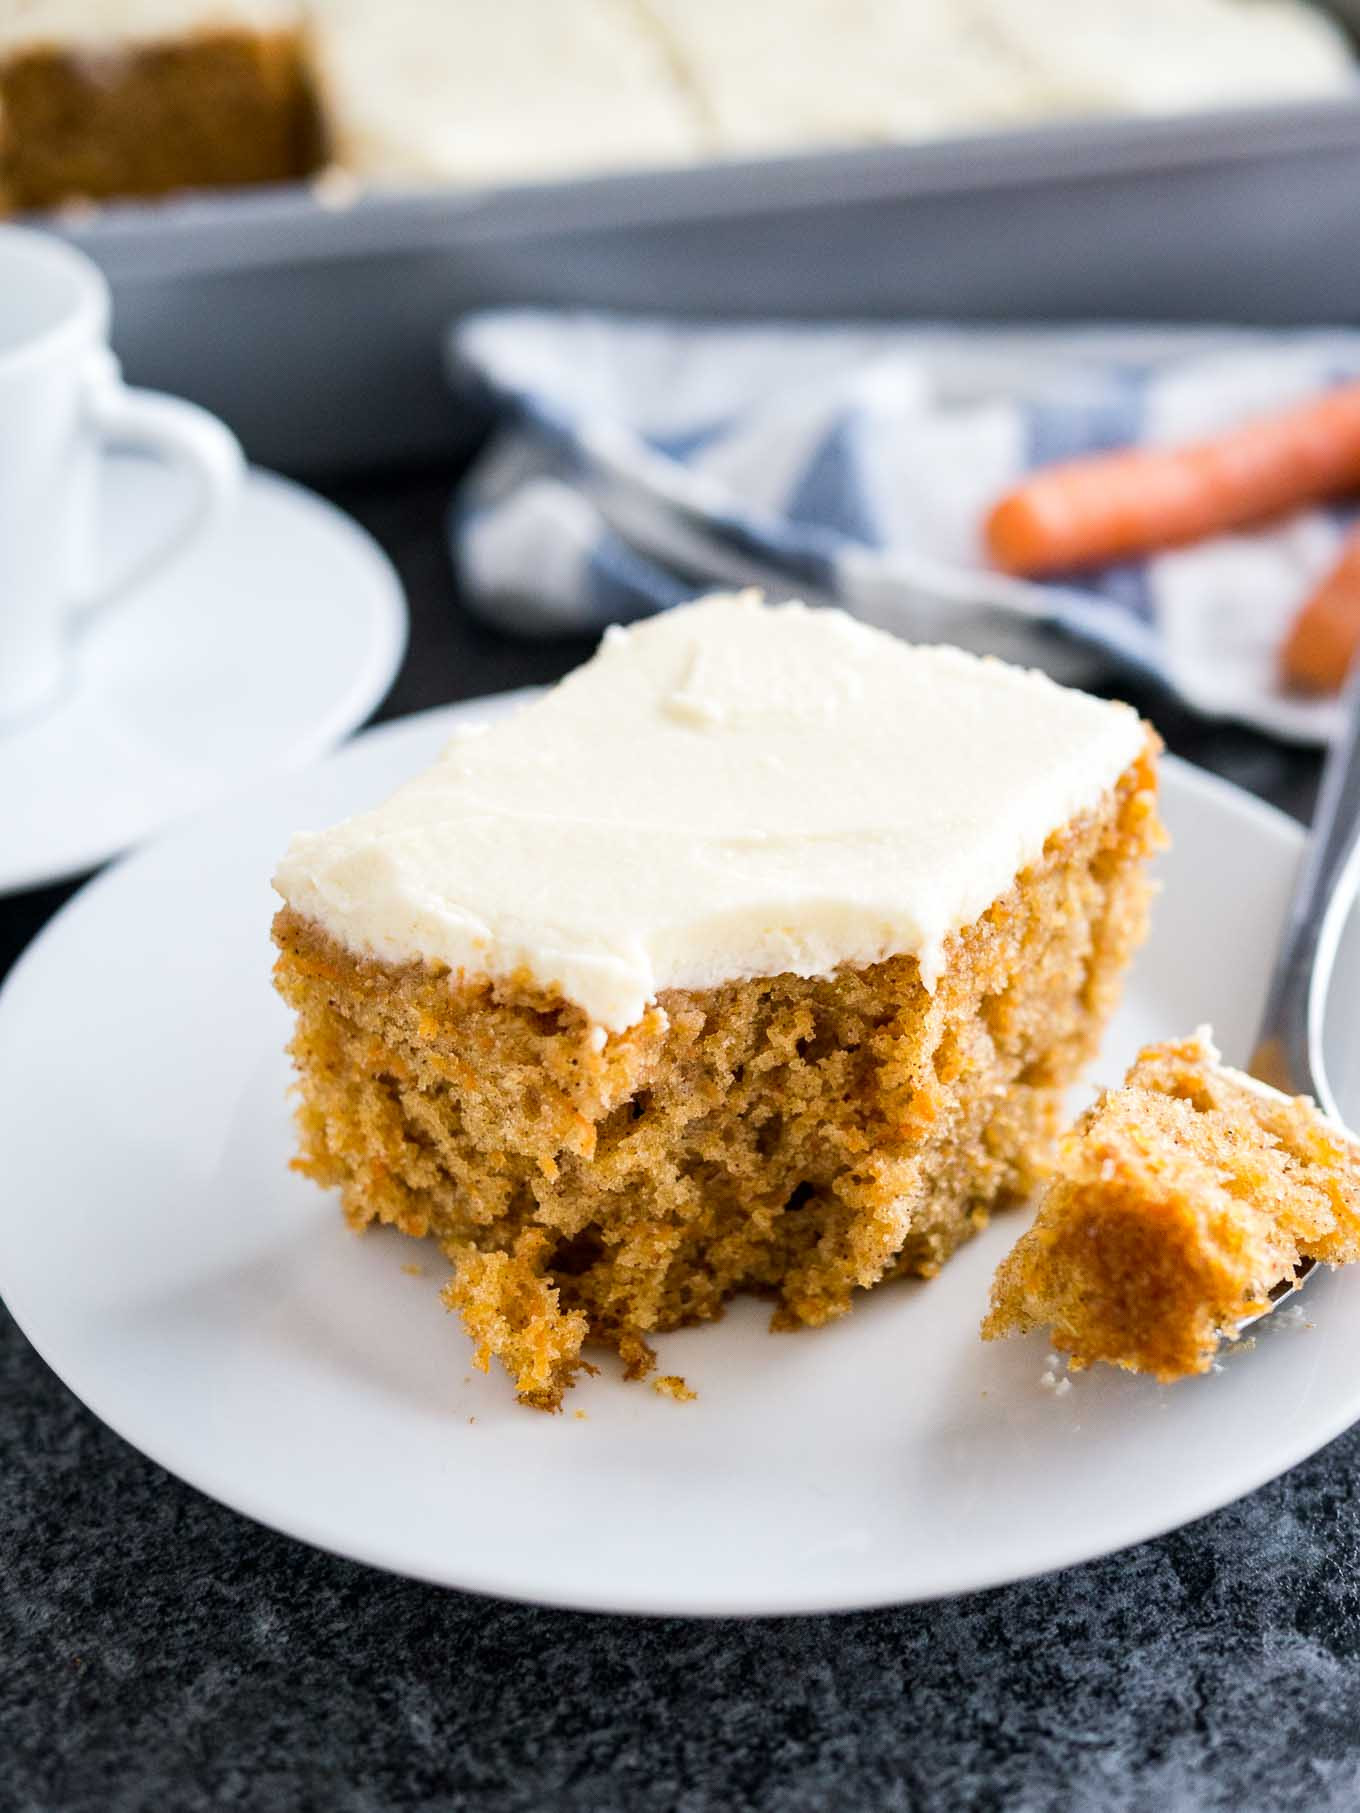 Easy Carrot Cake Recipe
 Easy Carrot Cake Recipe with Cream Cheese Frosting Nut free